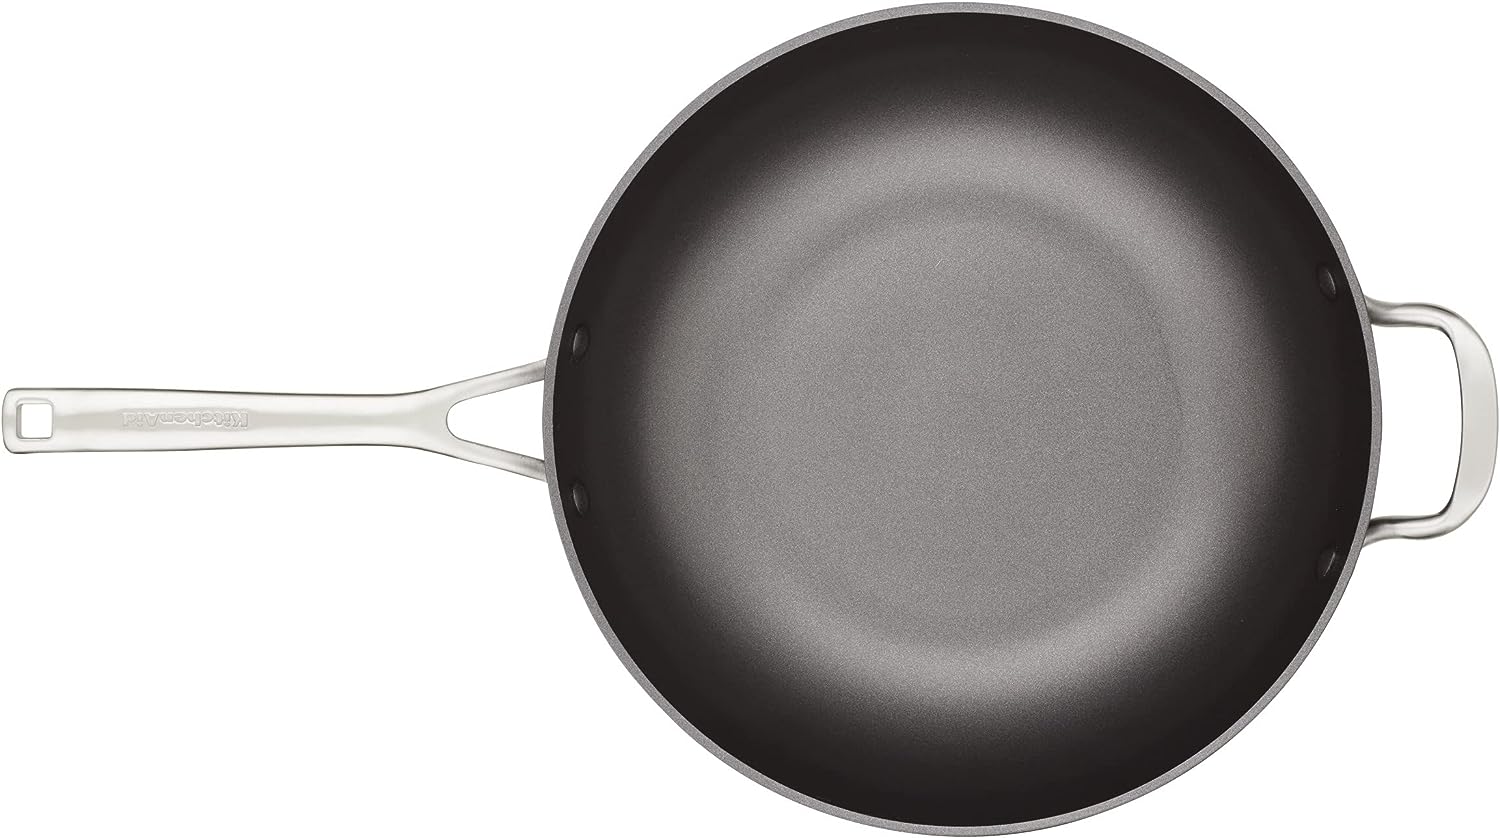 KitchenAid Stainless Steel Nonstick 8-Inch Frying Pan